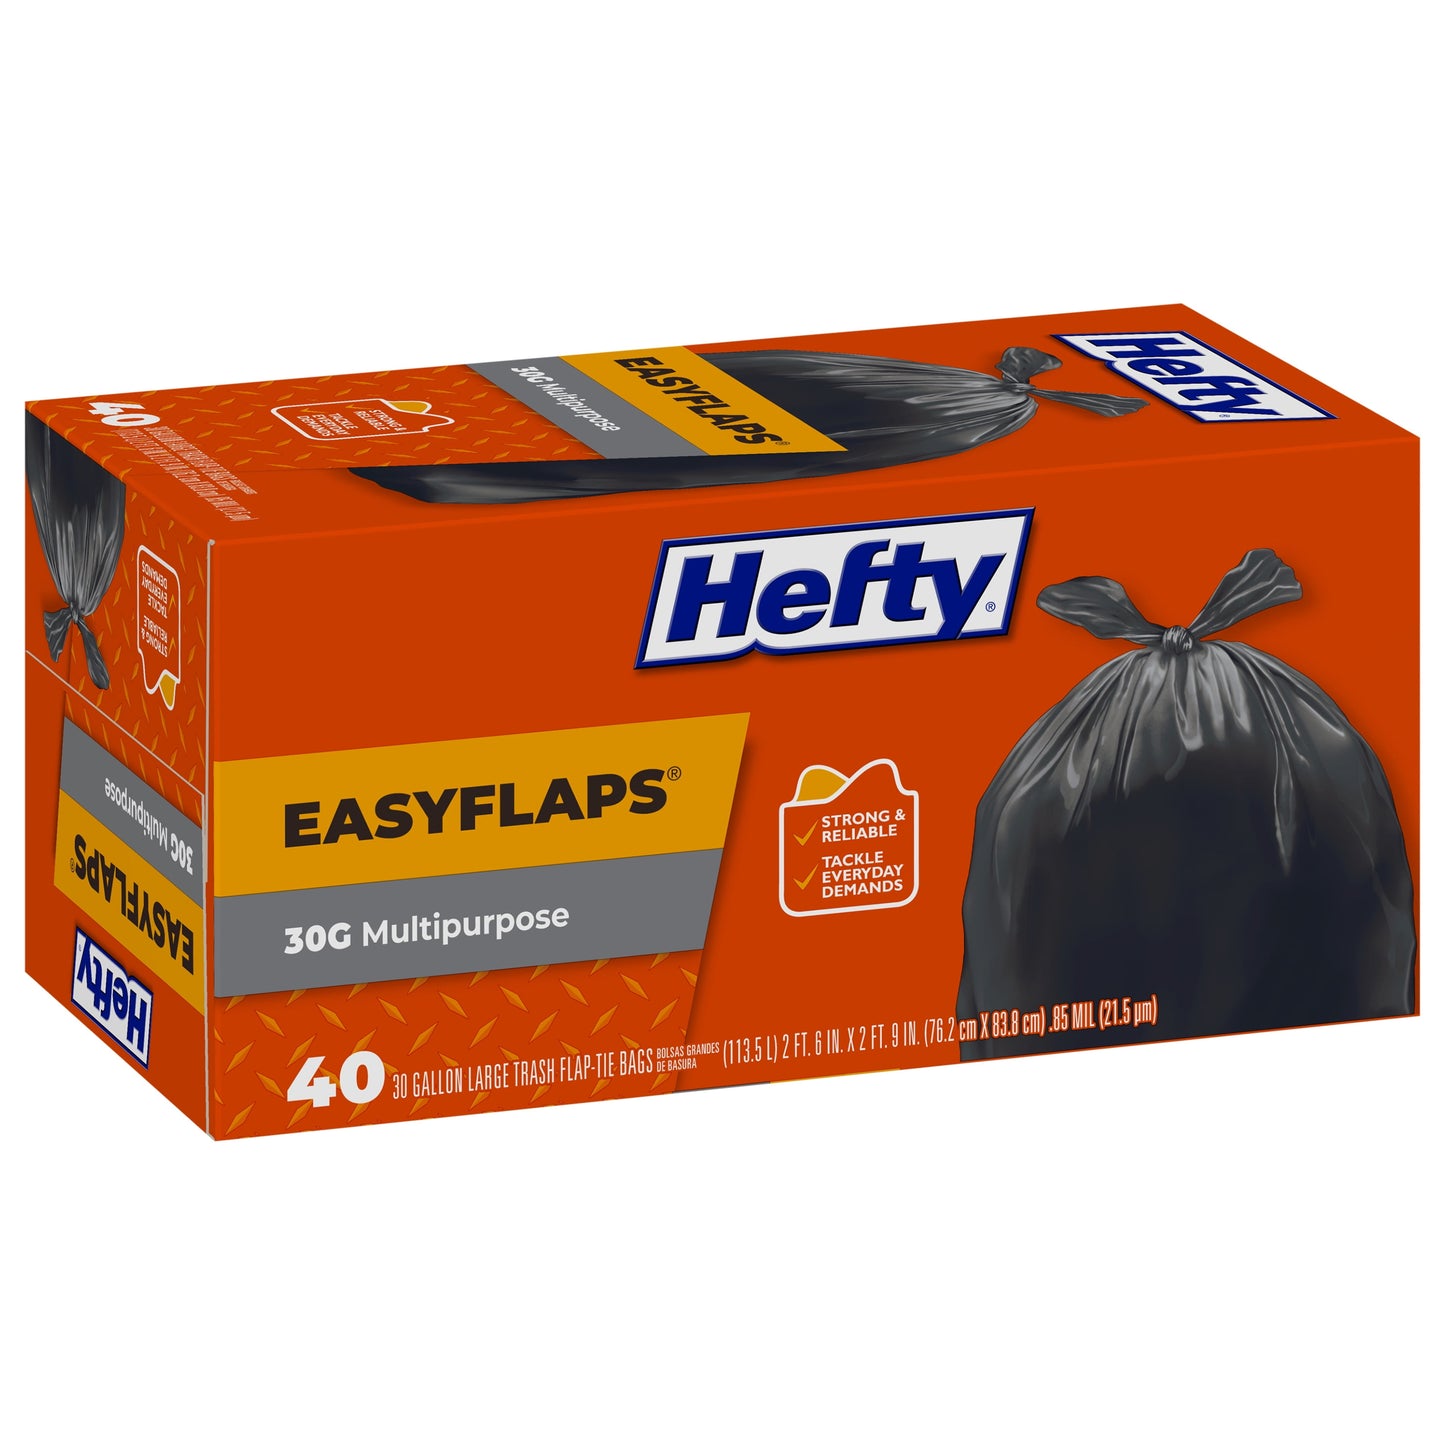 Hefty Easy Flaps Multipurpose Large Trash Bags, 30 Gallon, 40 Count